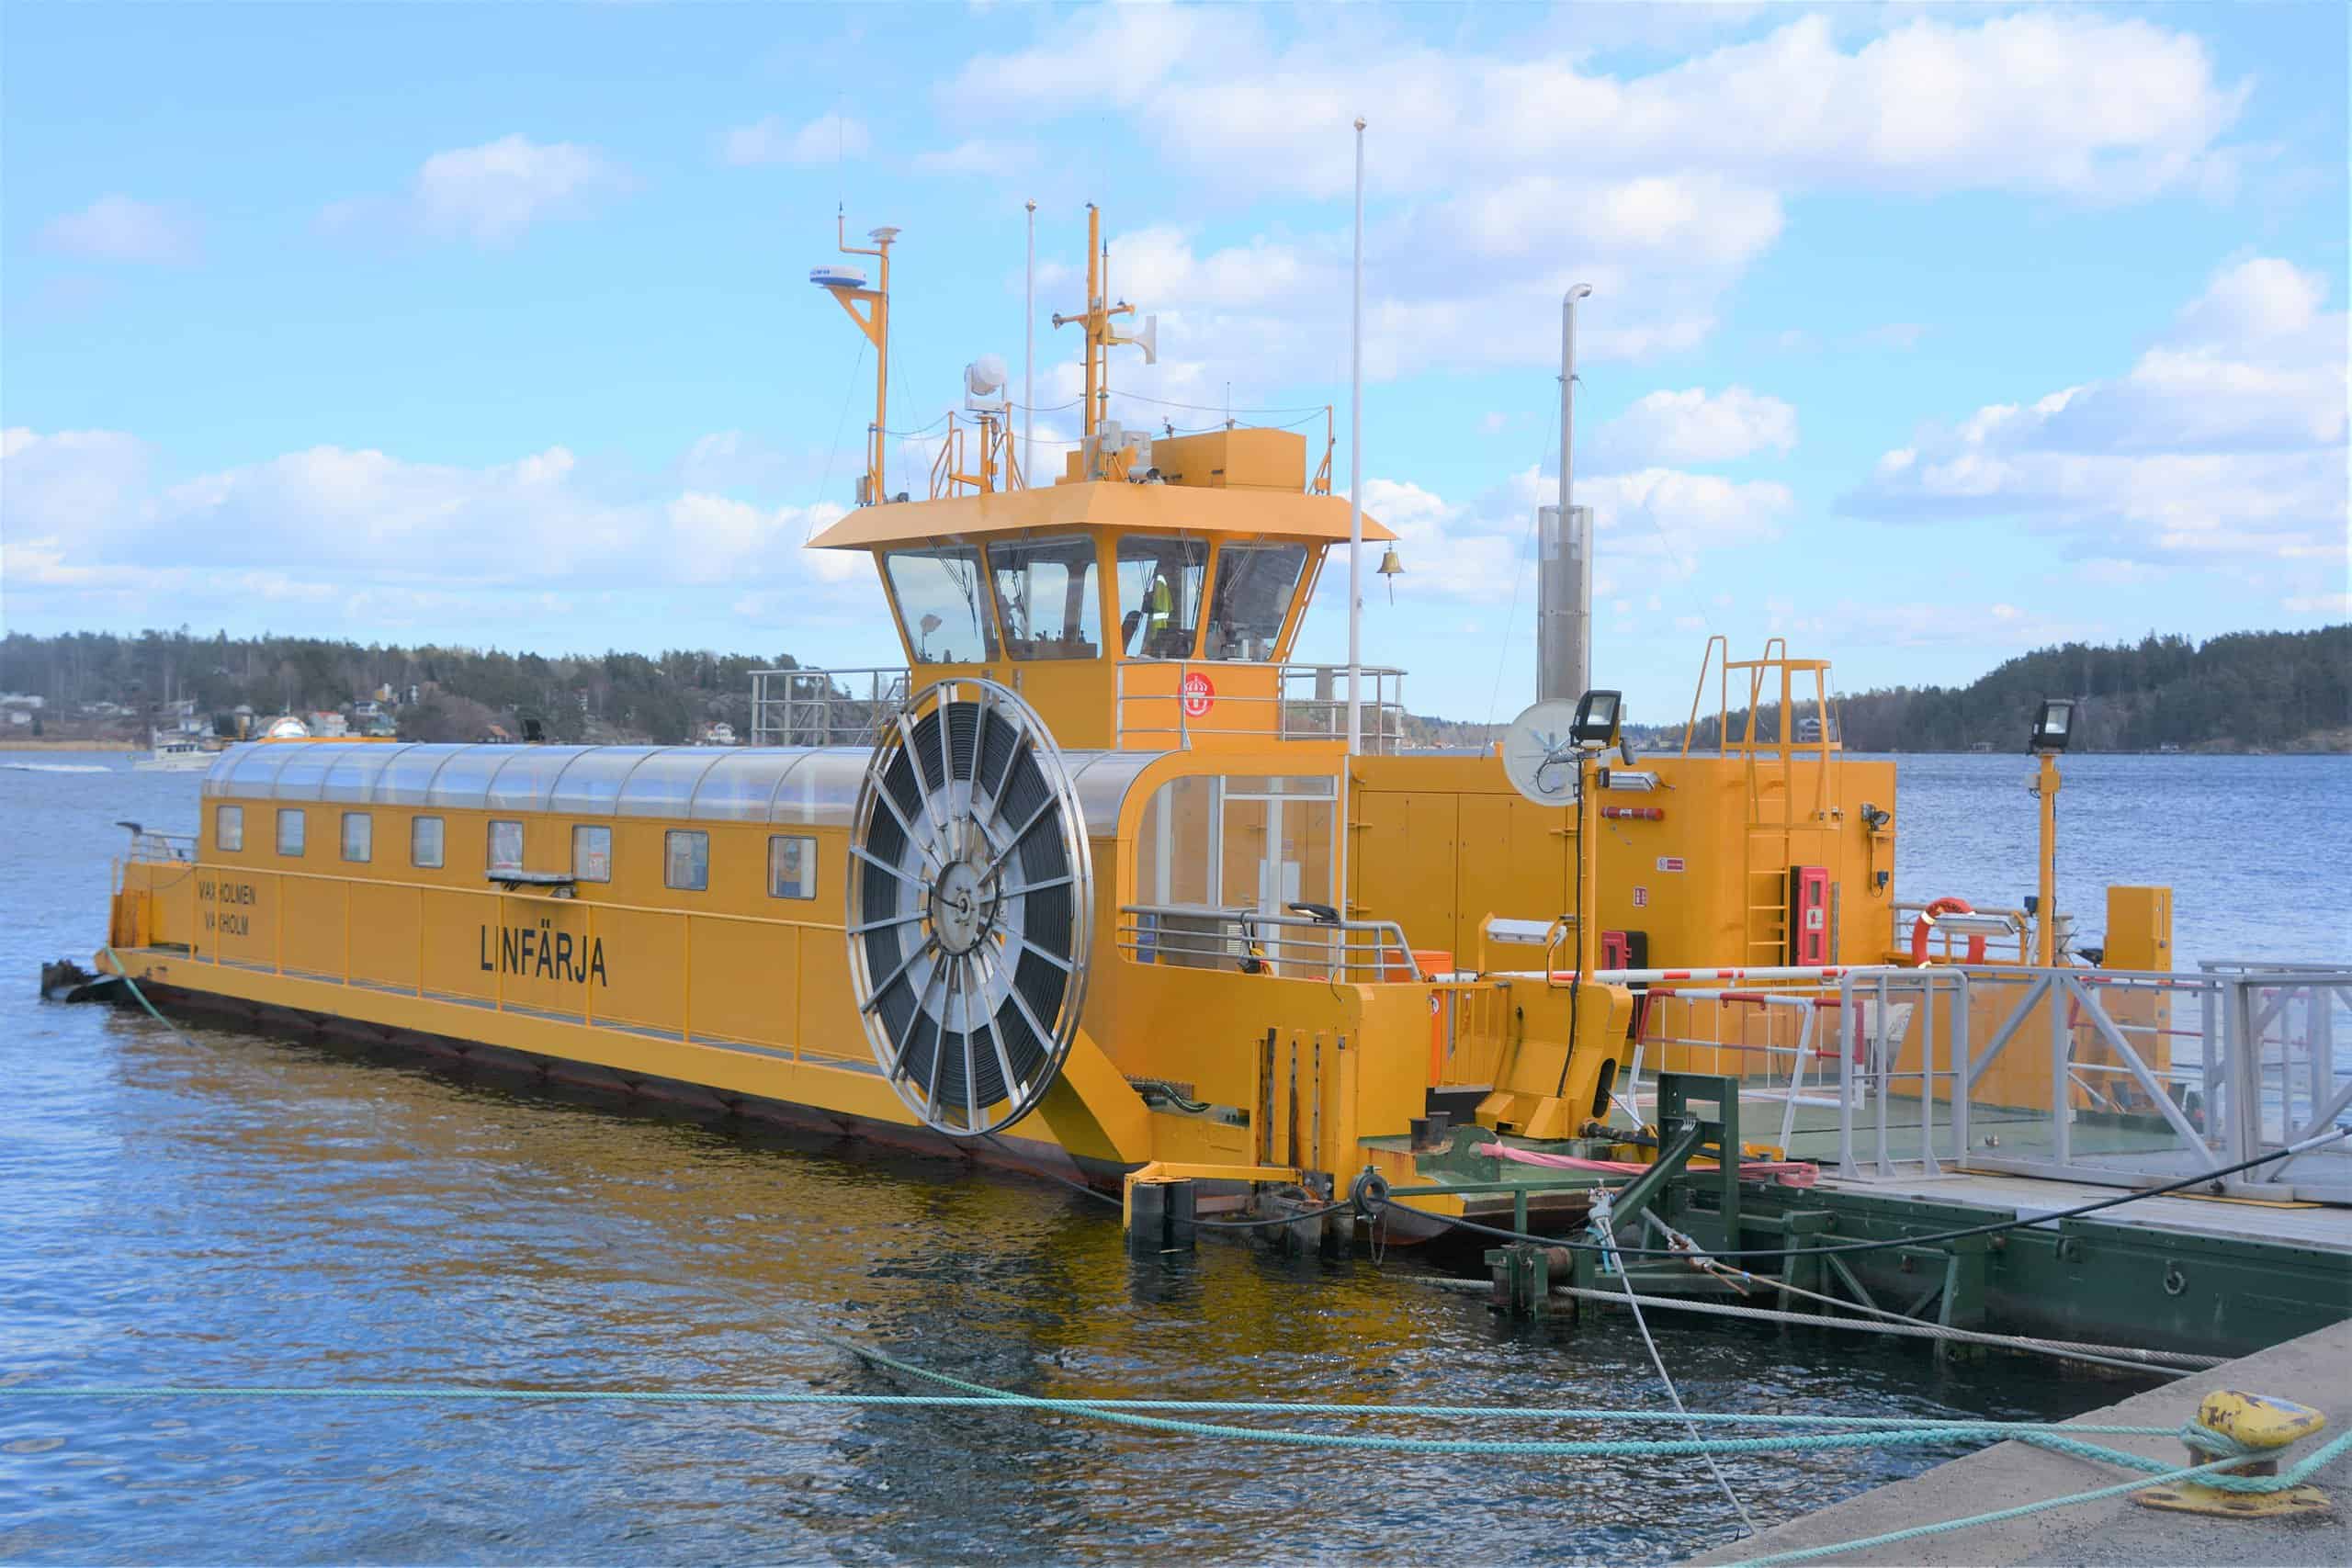 Cable ferry in Sweden